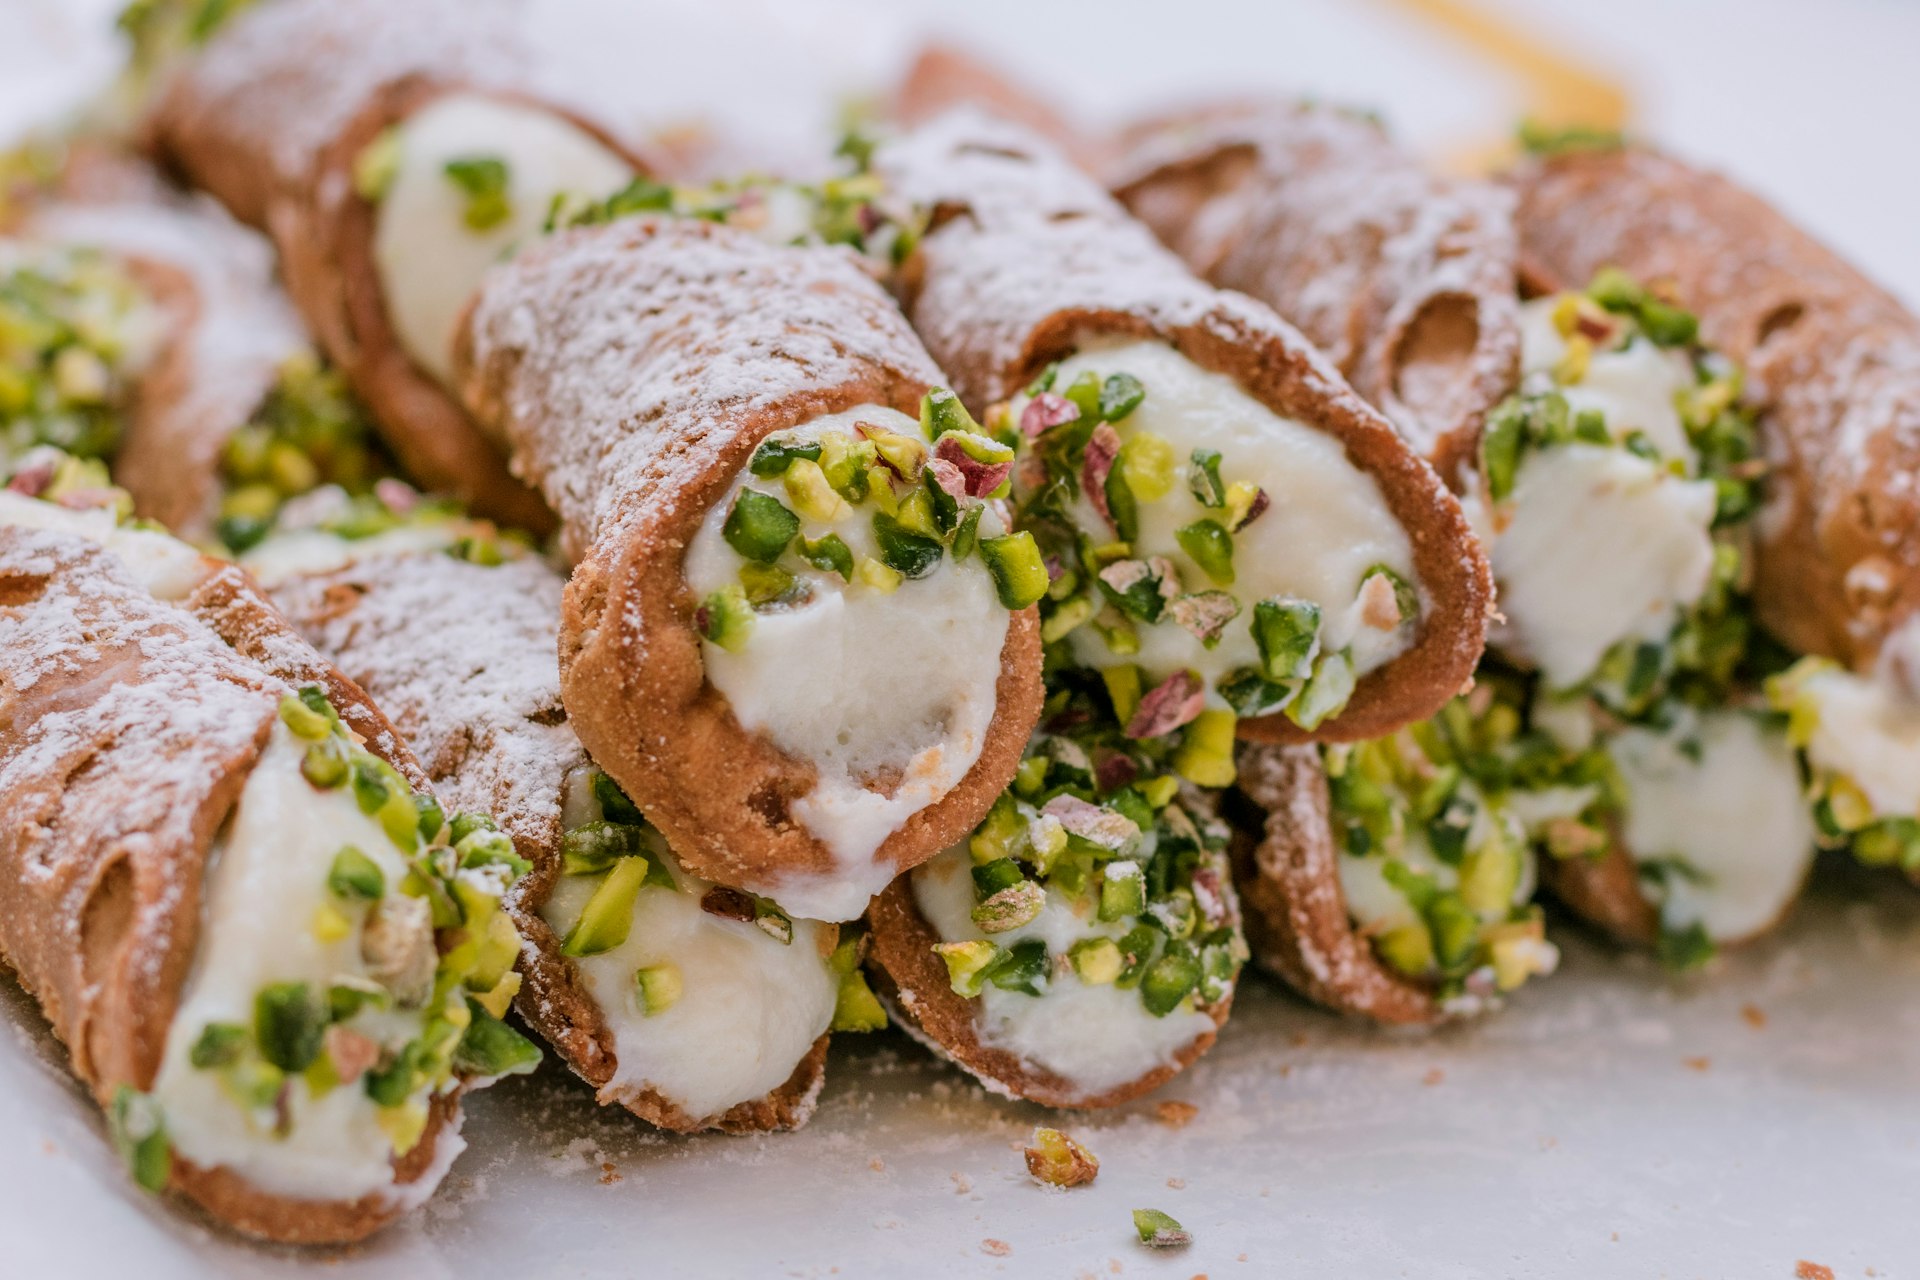 A close-up of a pile of Sicilian cannoli, tubular pastry shells filled with pistachio-studded ricotta and covered with powdered sugar